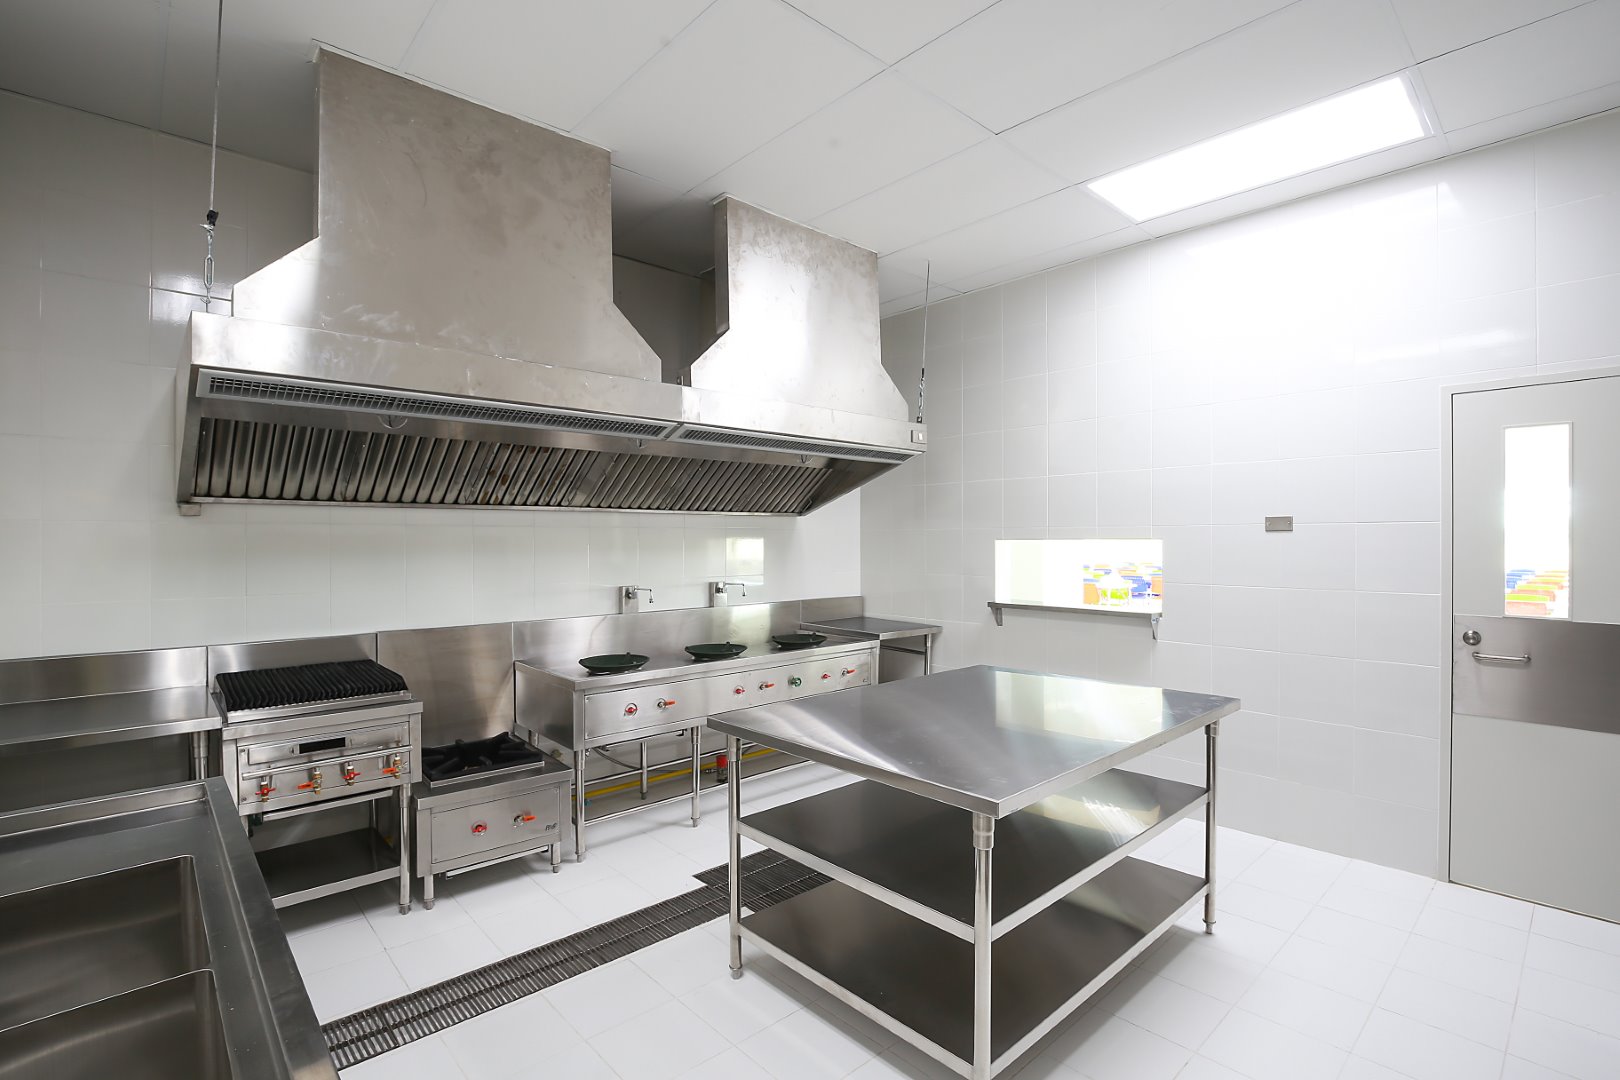 About Hood Repairs Commercial Kitchen Ventilation Company